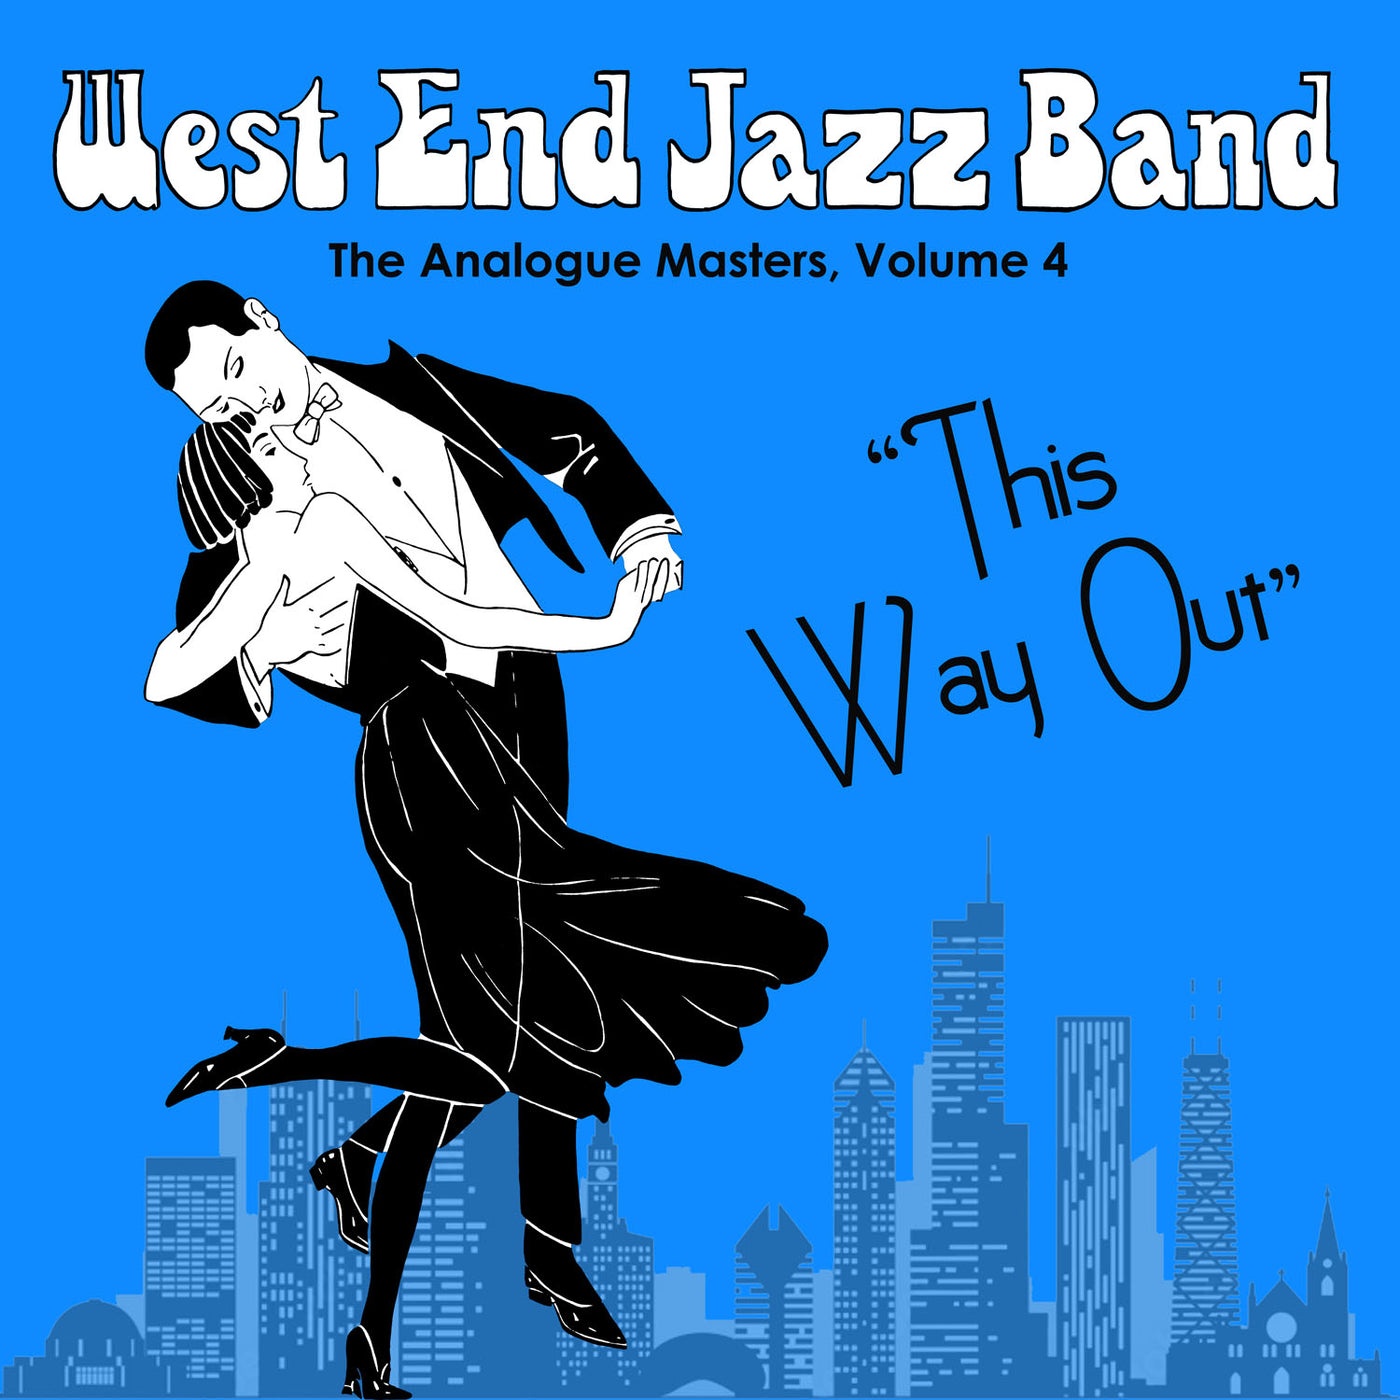 Rivermont　Jazz　4:　–　Records　Way　End　This　The　Volume　Masters,　Analogue　Band　West　Out